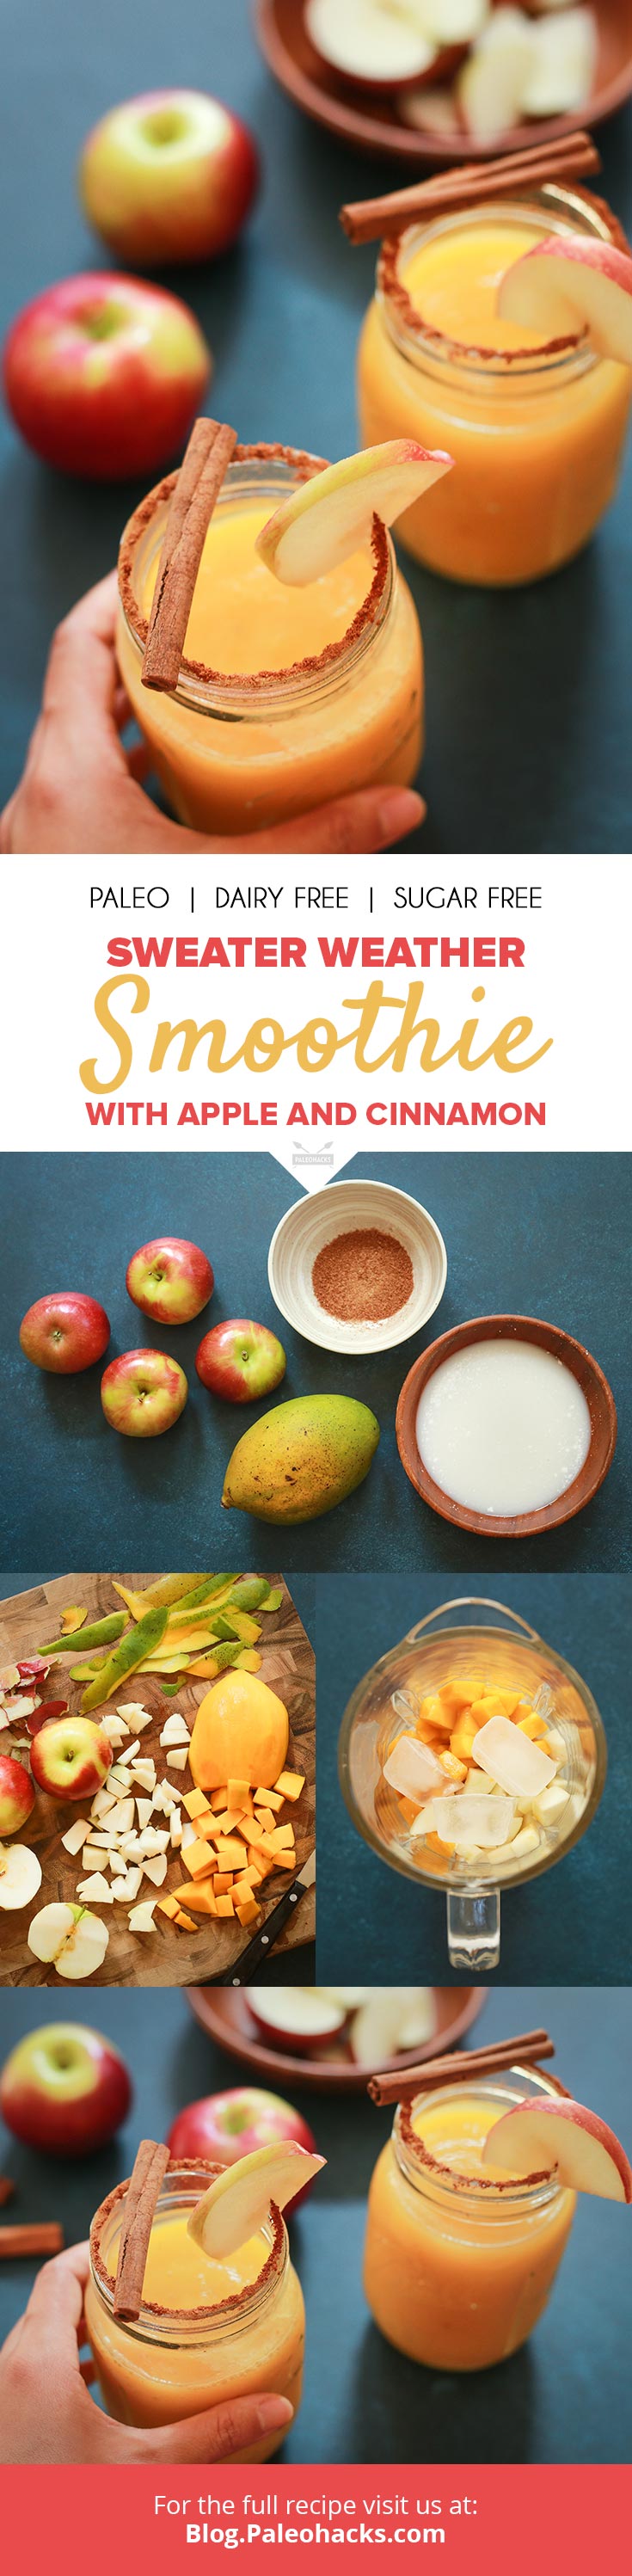 Start your day with this vibrant, energy-boosting smoothie. It’s sweet, refreshing, and finished with a delightful taste of cinnamon!